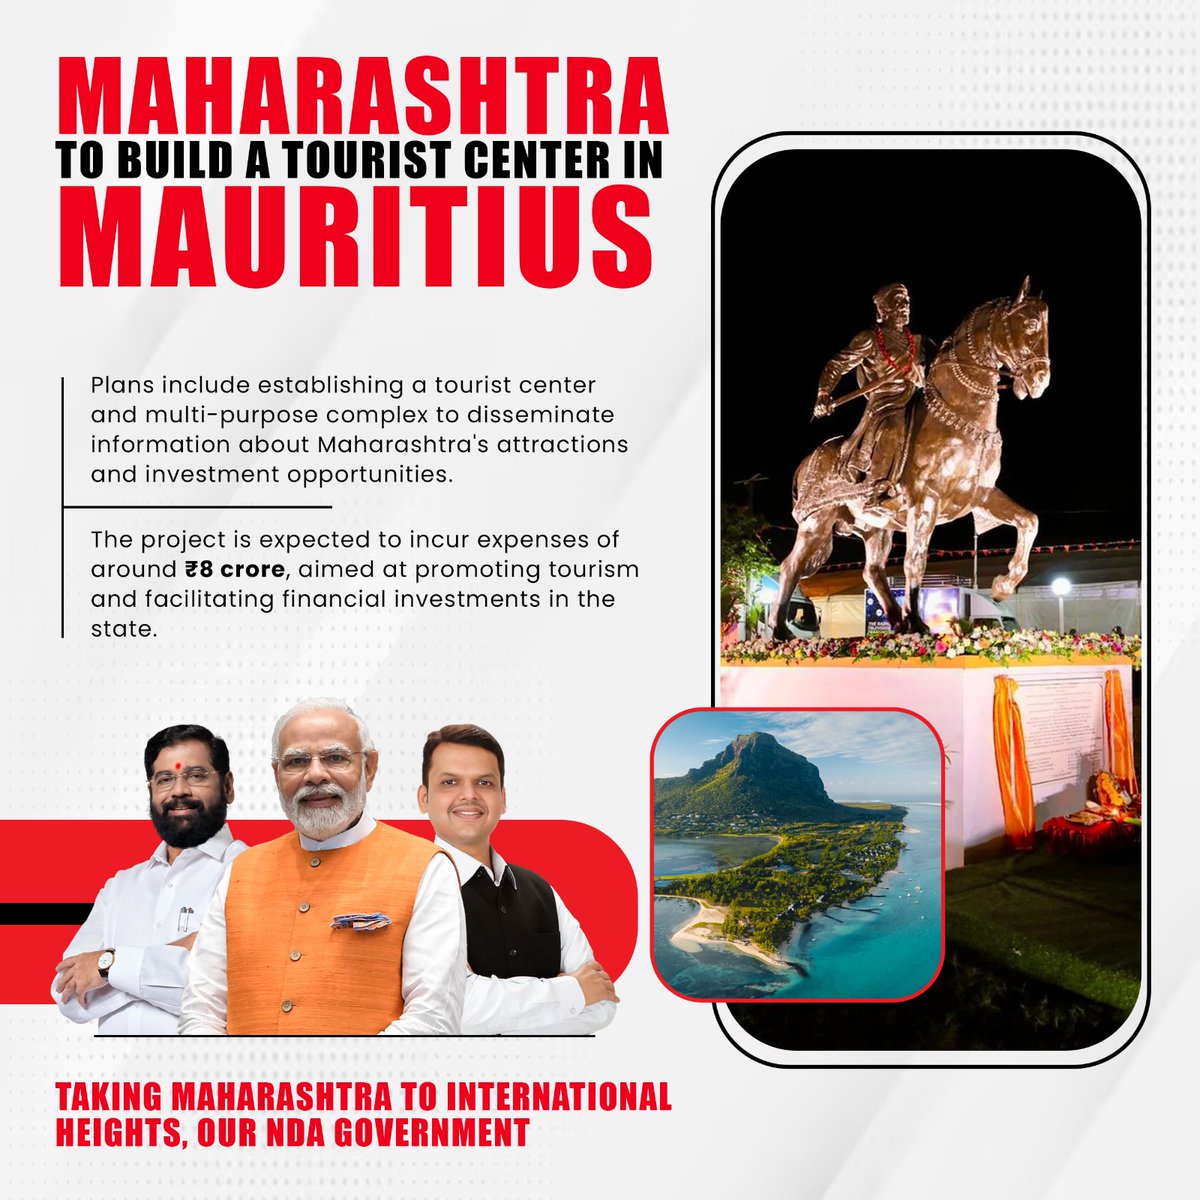 Mauritius welcomes a piece of Maharashtra with plans for a new tourist center and multi-purpose complex. Thanks to CM Eknath Shinde's forward-thinking governance, Maharashtra's allure reaches international shores, attracting visitors and investors alike.